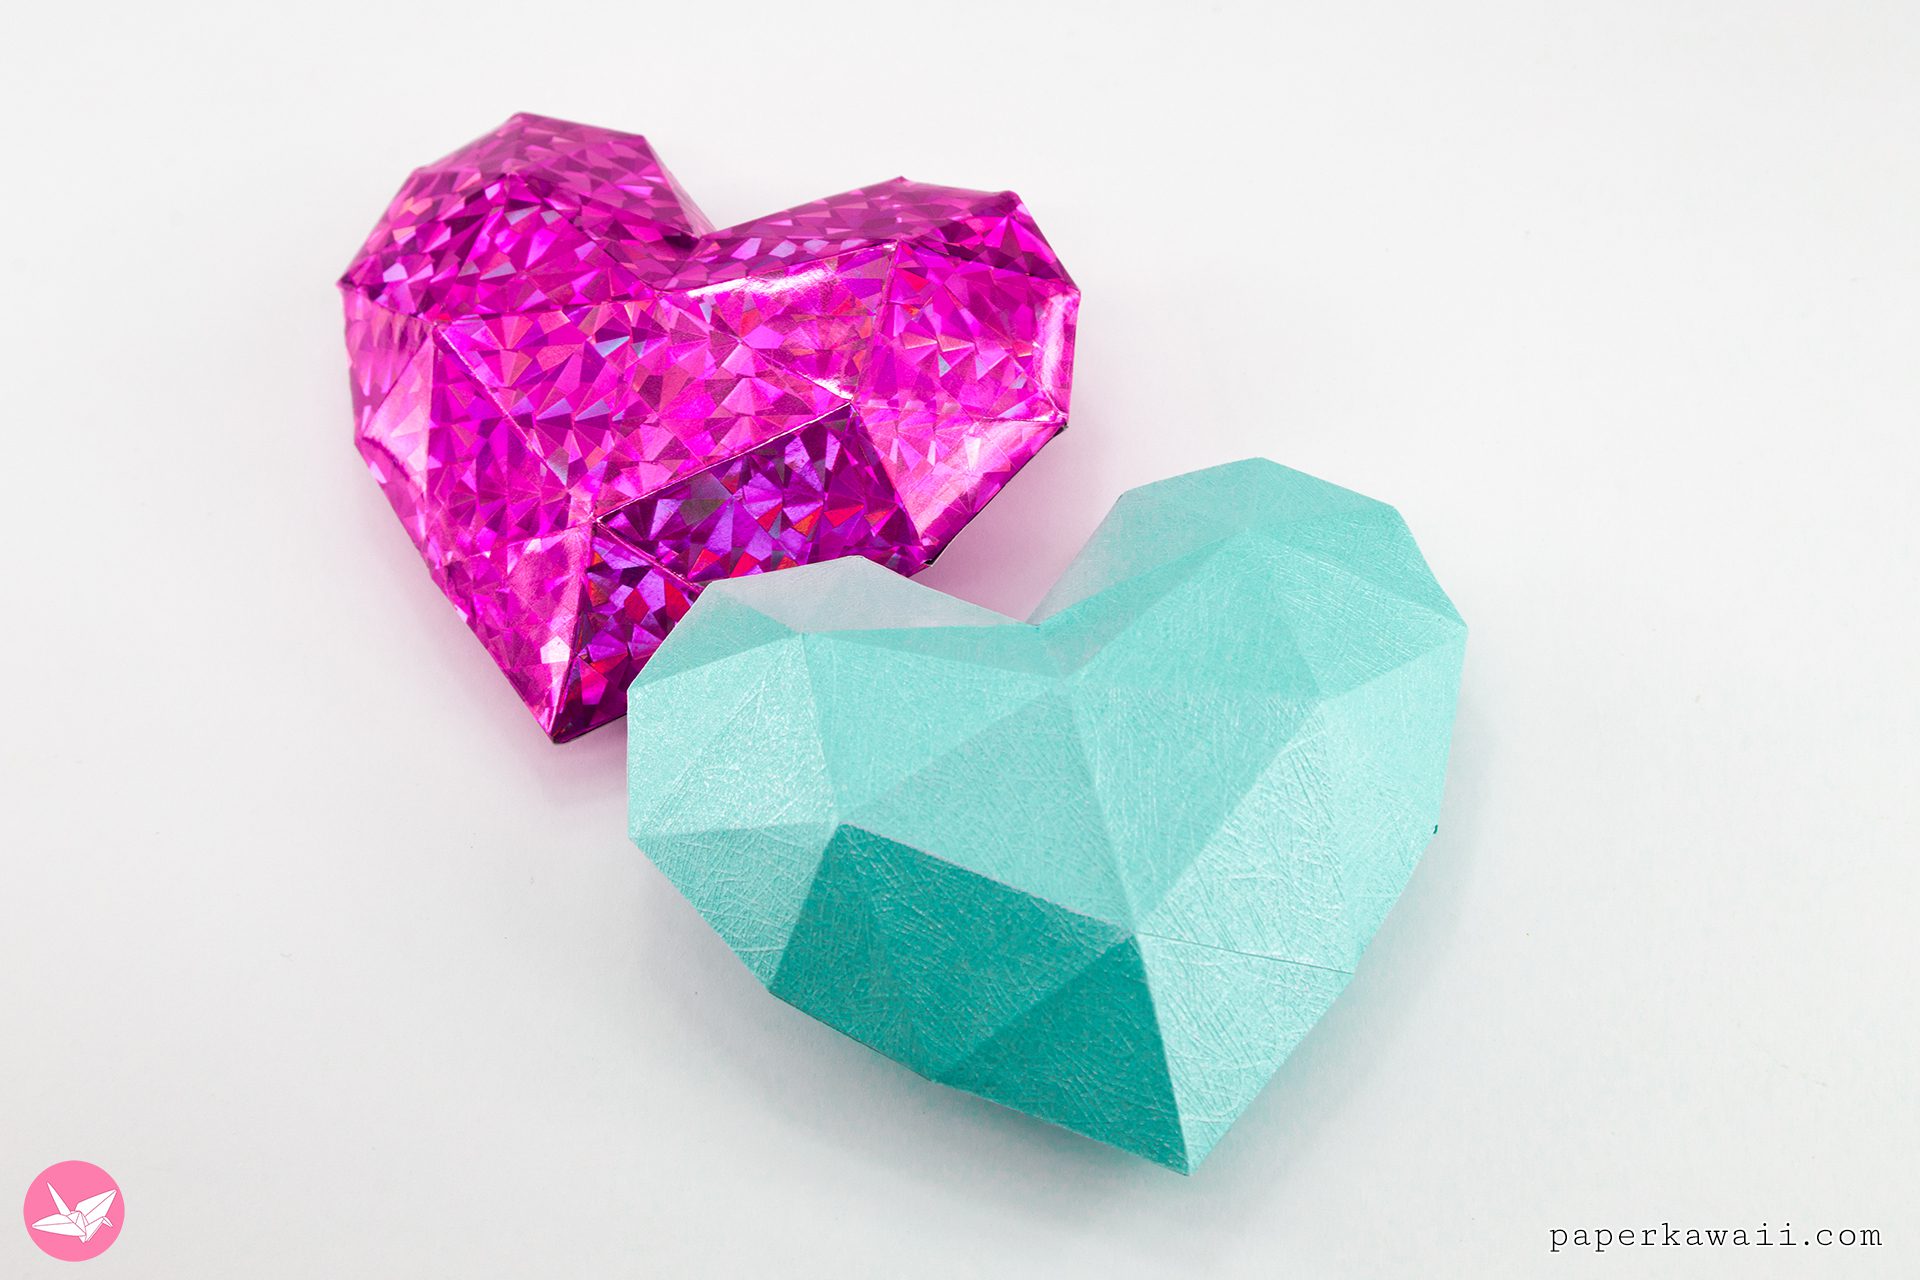 83,889 Paper Craft Heart Images, Stock Photos, 3D objects